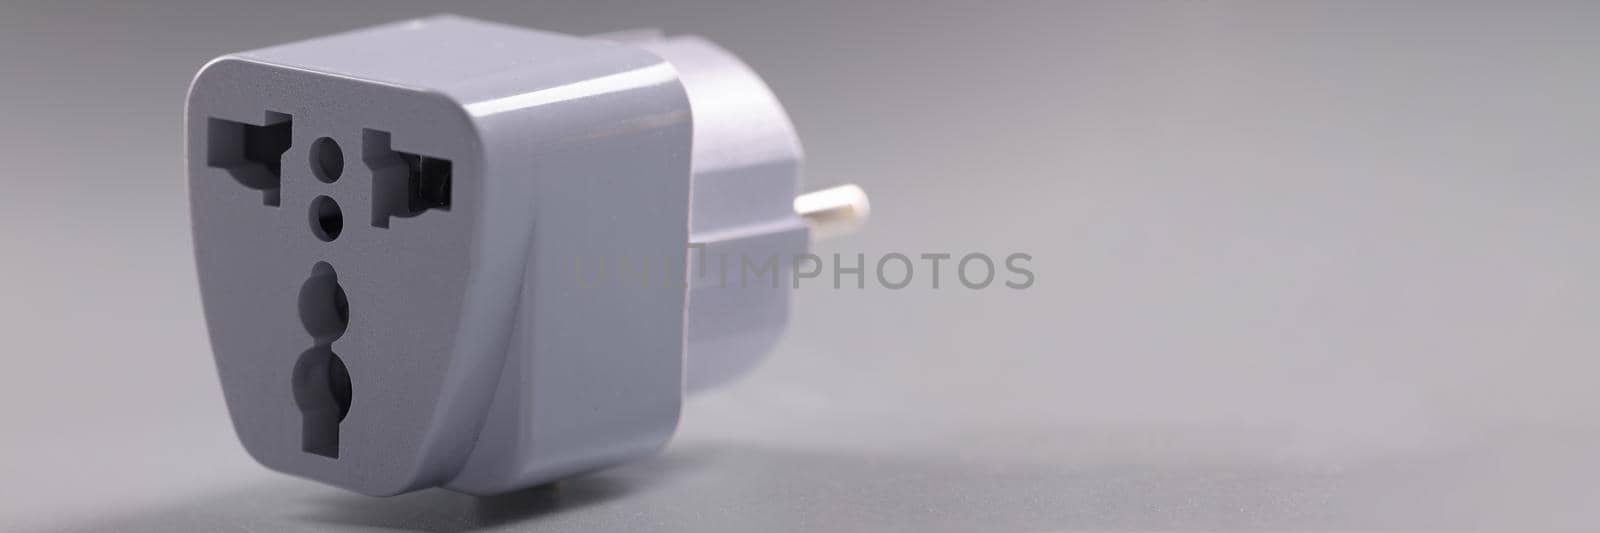 Universal white plugs adapter, adapter to put in sockets by kuprevich